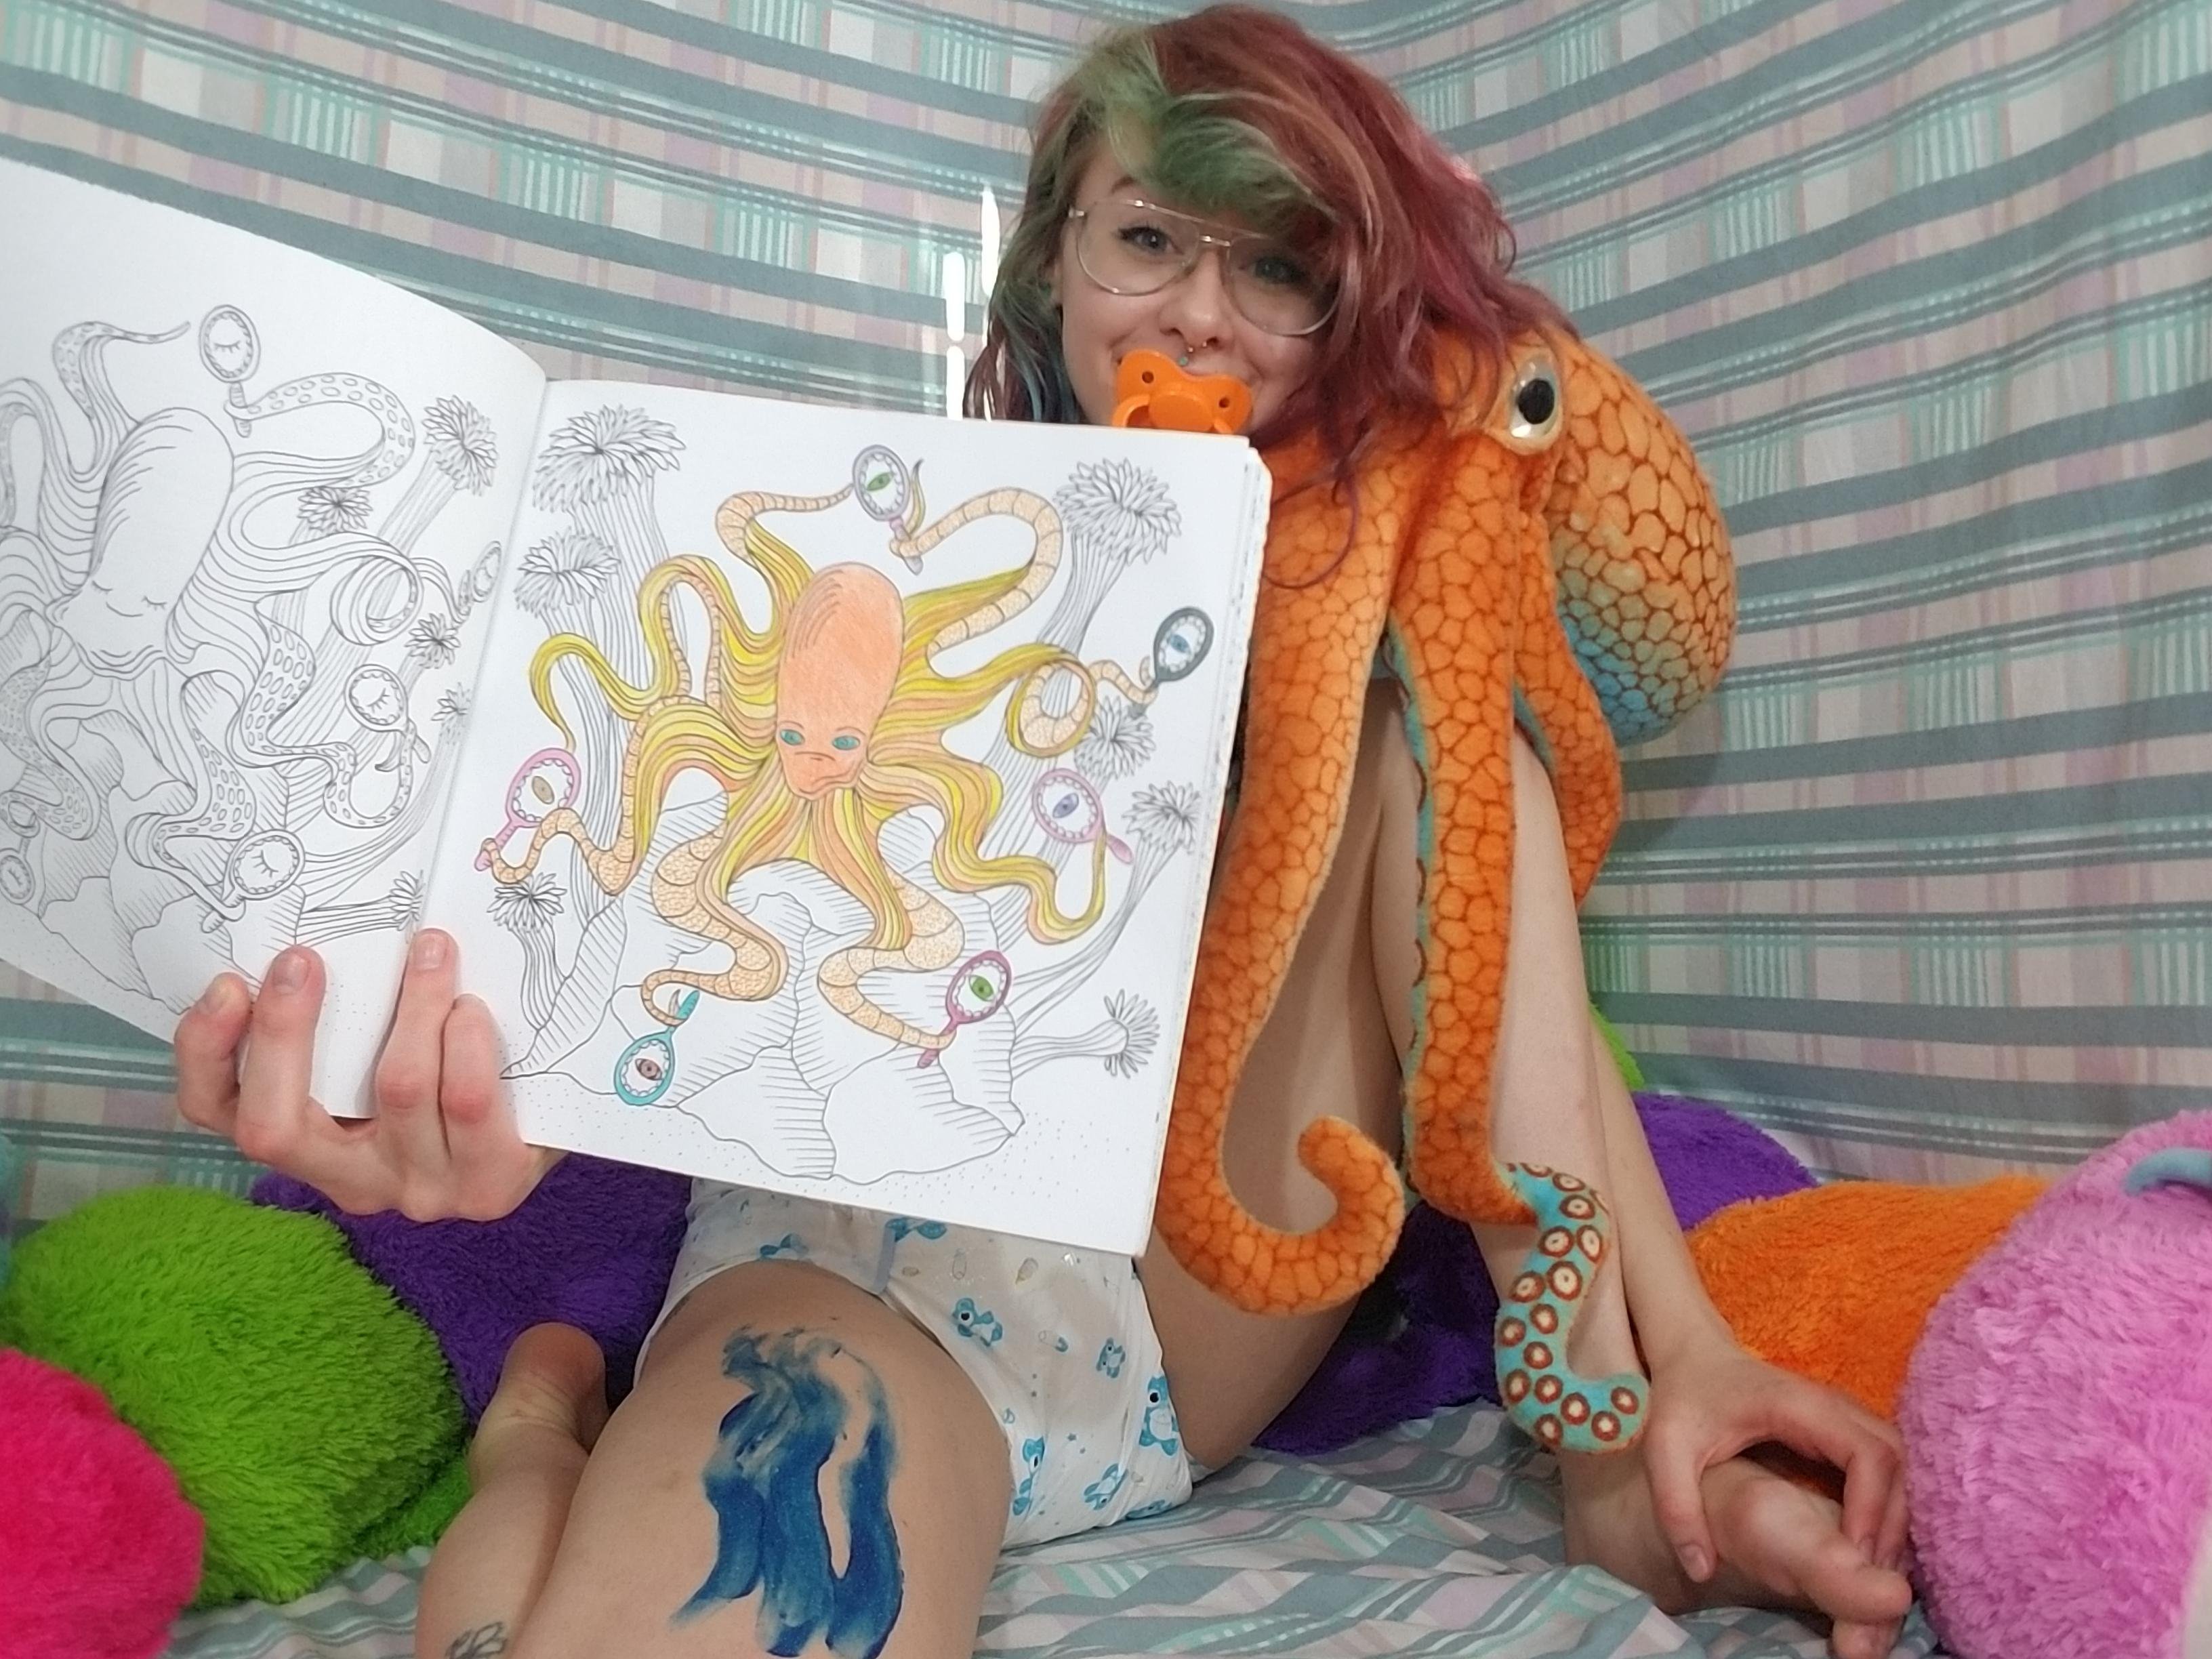 i found an octopus in my coloring book that looks like franklin!